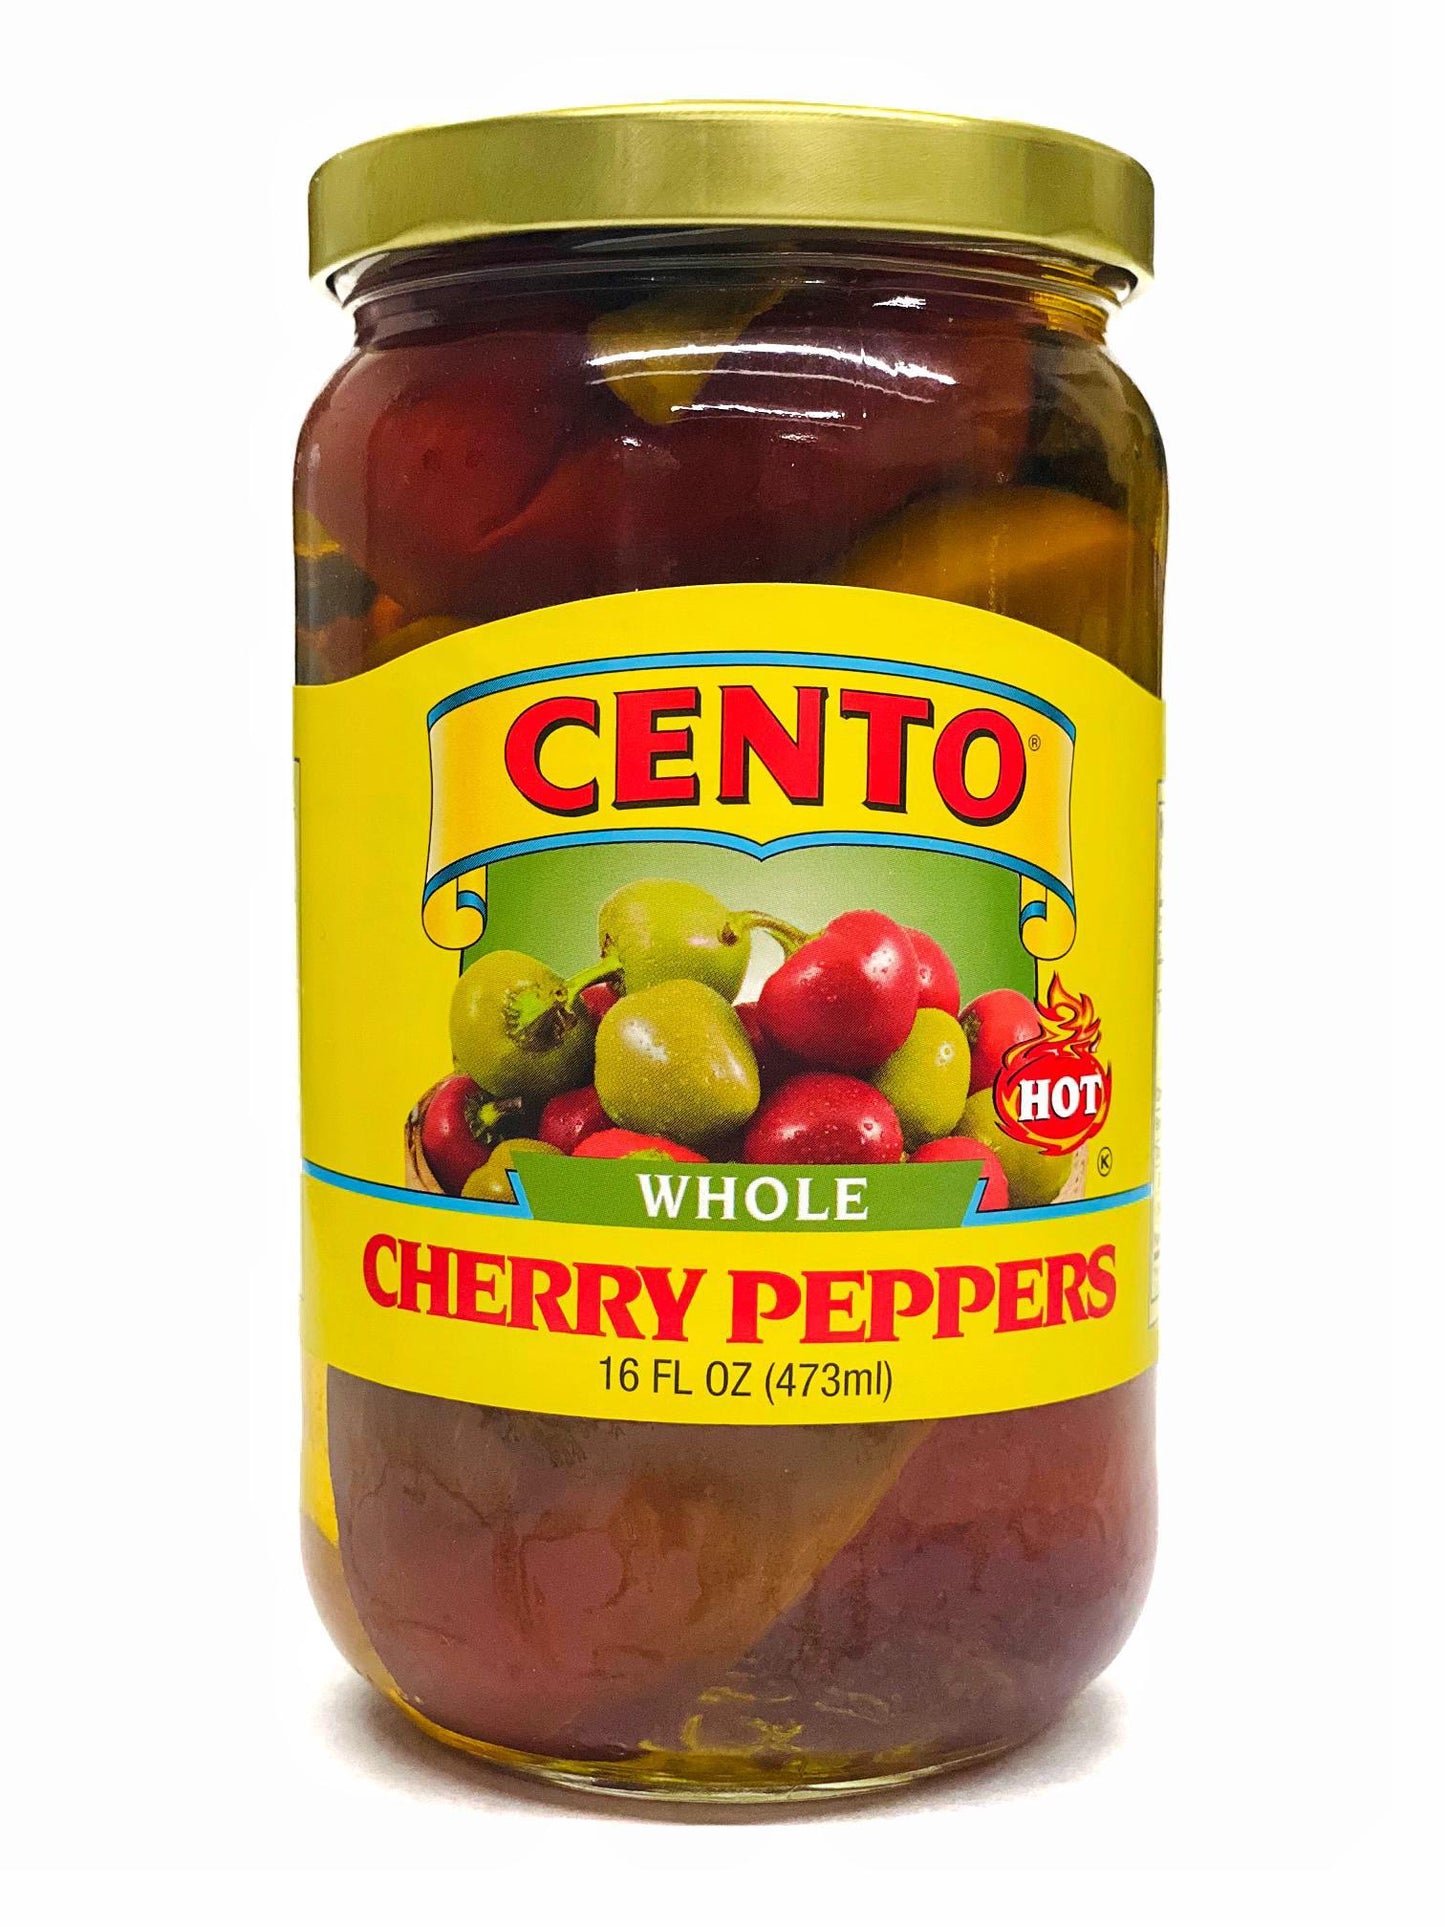 Cento Whole Hot Cherry Peppers, 16 fl oz